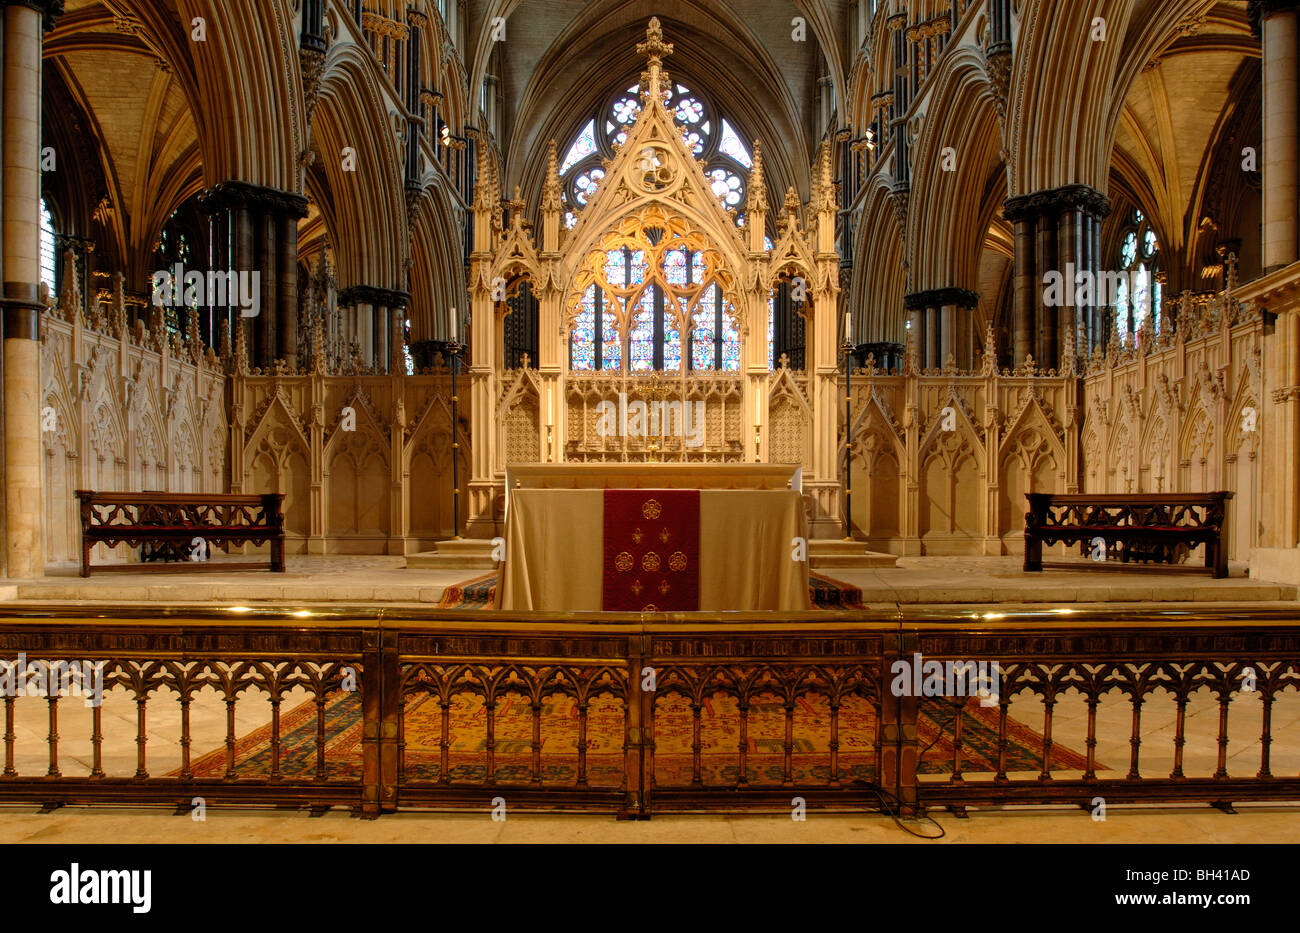 View of the Sanctuary looking towards the High Altar, Lincoln Cathedral, Lincoln, Lincolnshire, England, UK. Stock Photo